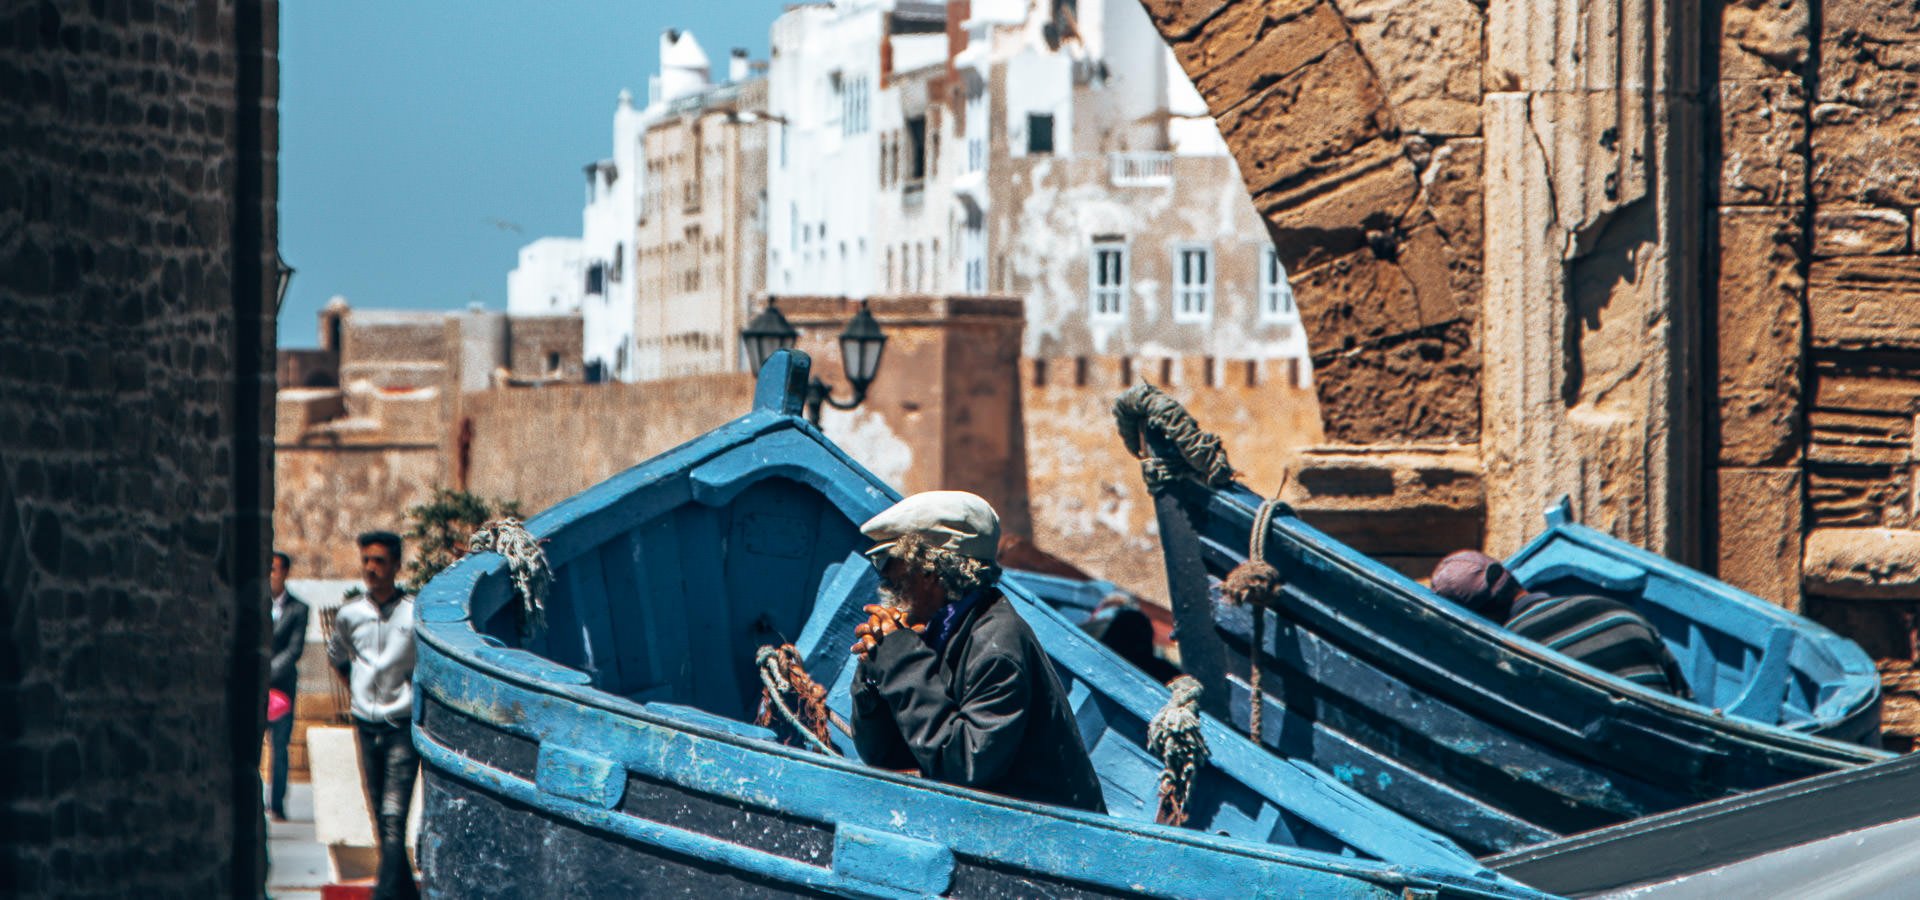 Your Complete Travel Guide To Essaouira, Morocco | morocco travel photography 3